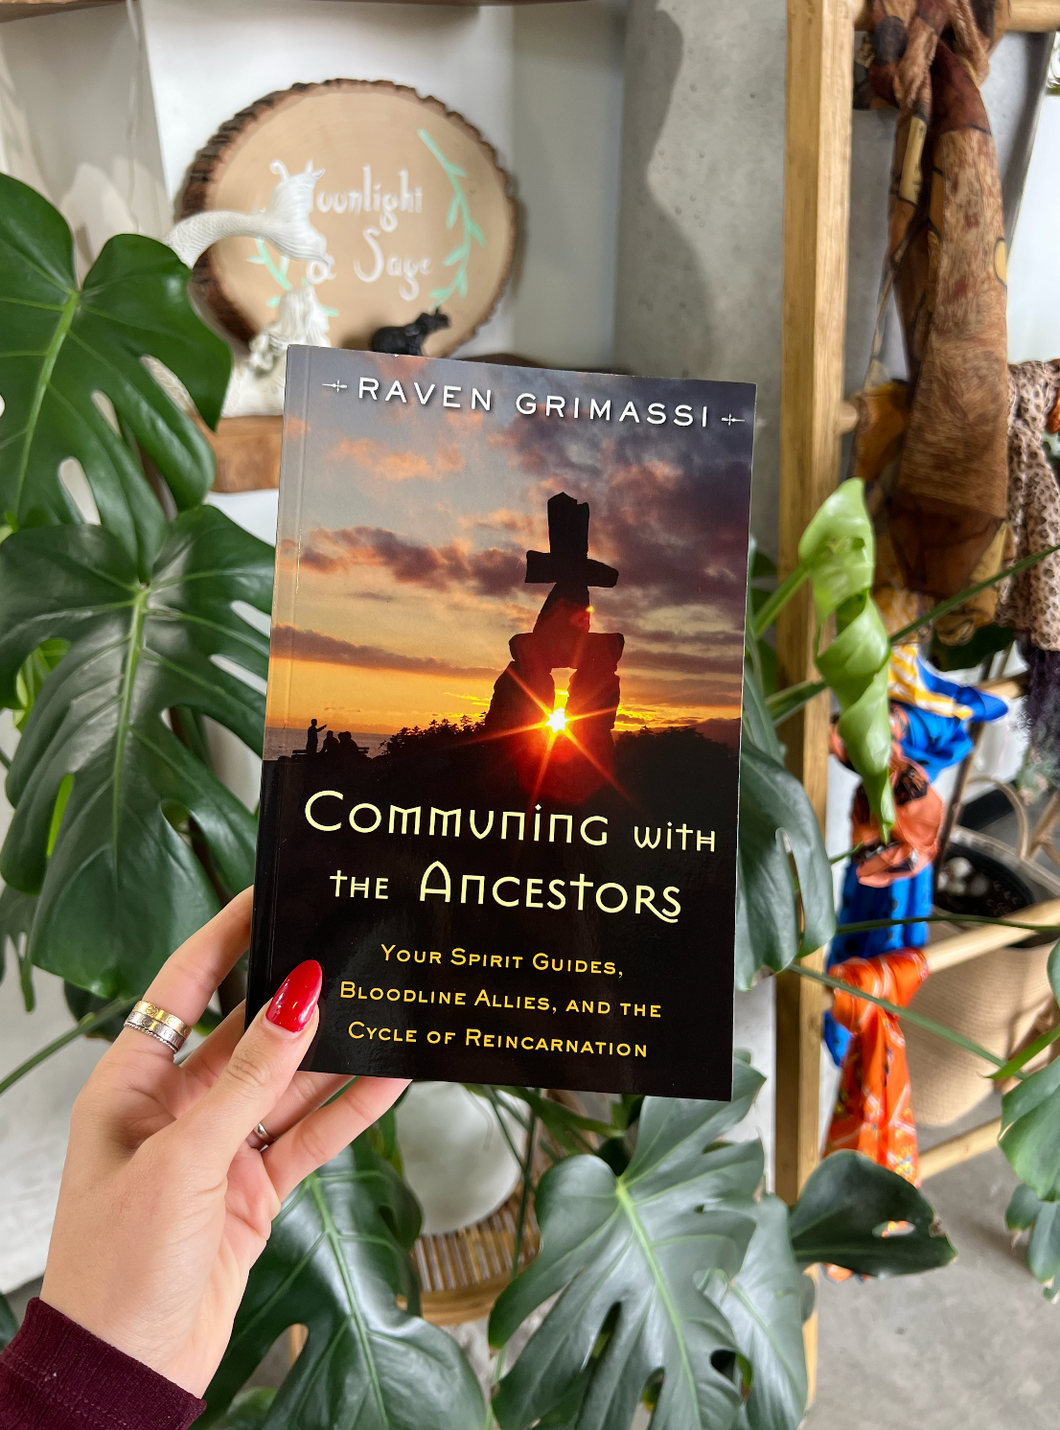 Communing with the Ancestors: Your Spirit Guides, Bloodline Allies, and the Cycle of Reincarnation Paperback